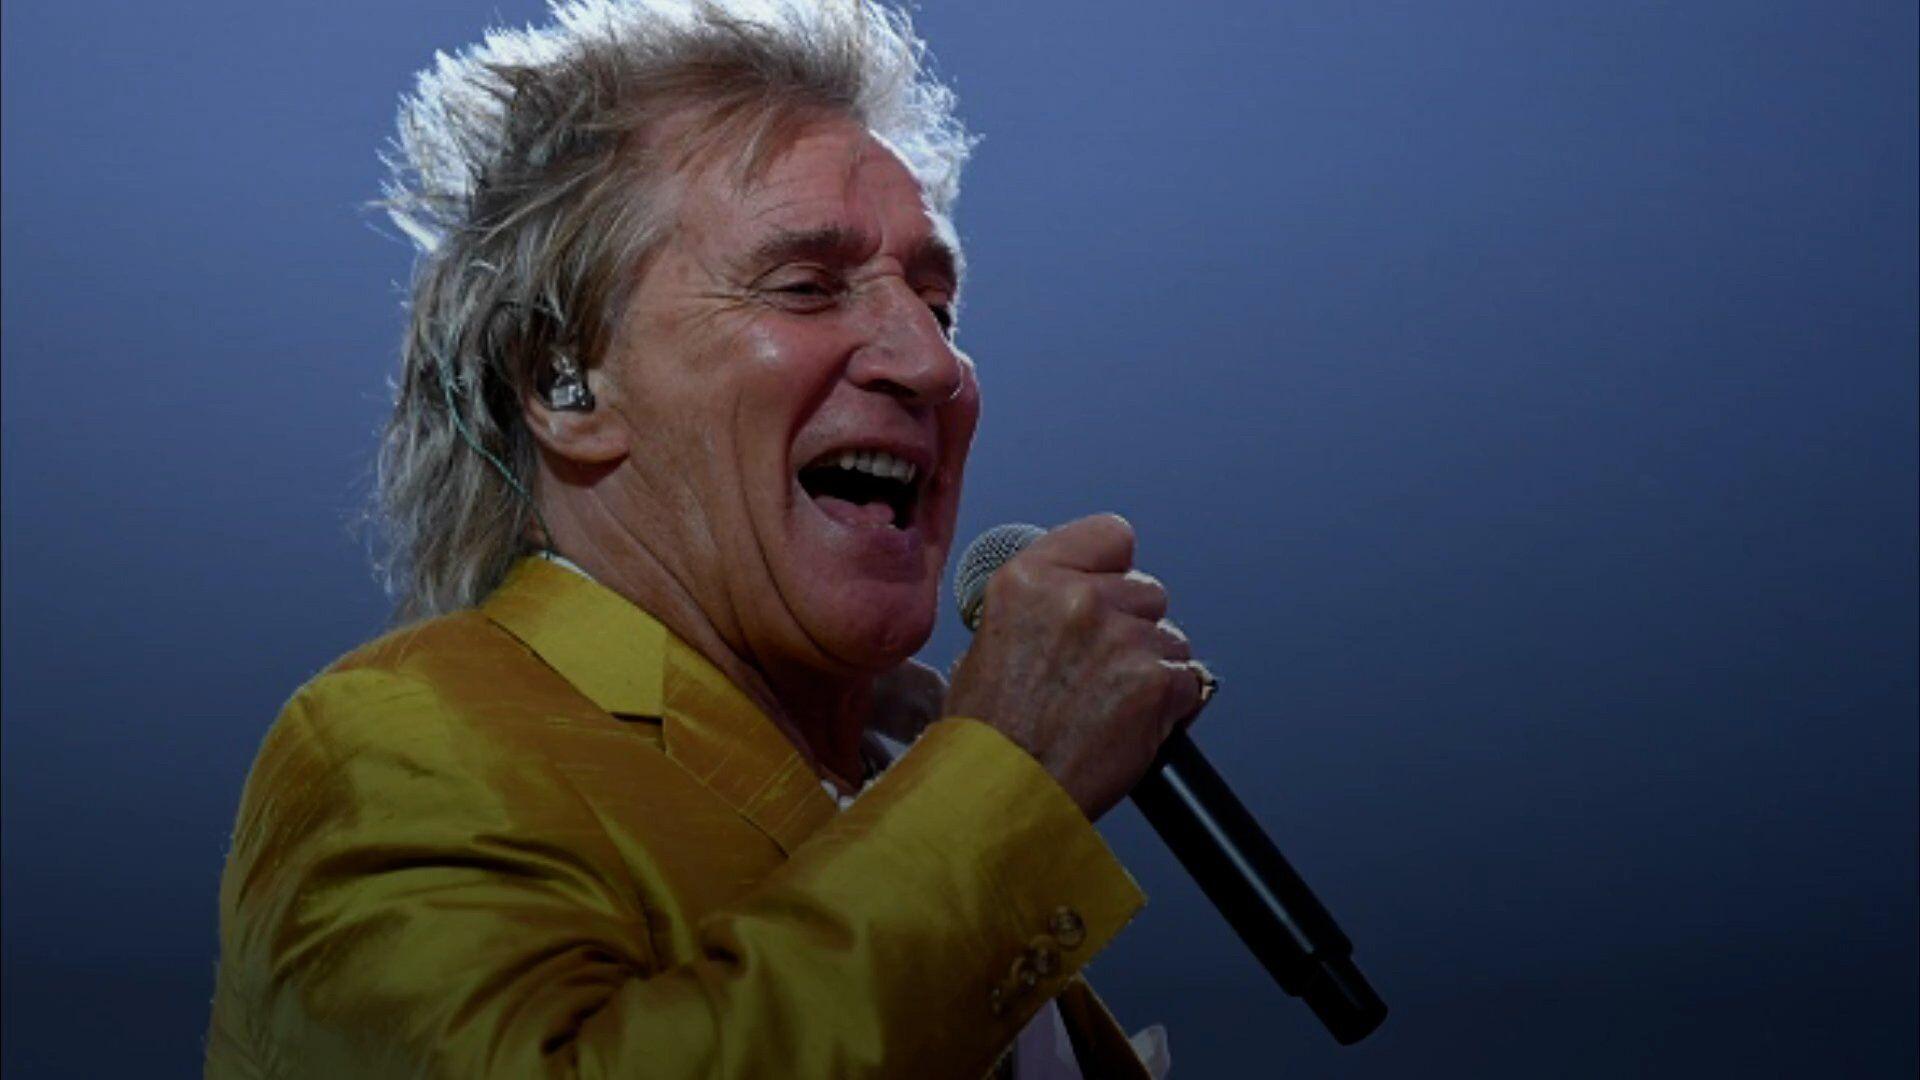 Rod Stewart Says He 'Turned Down' $1 Million to Perform in Qatar